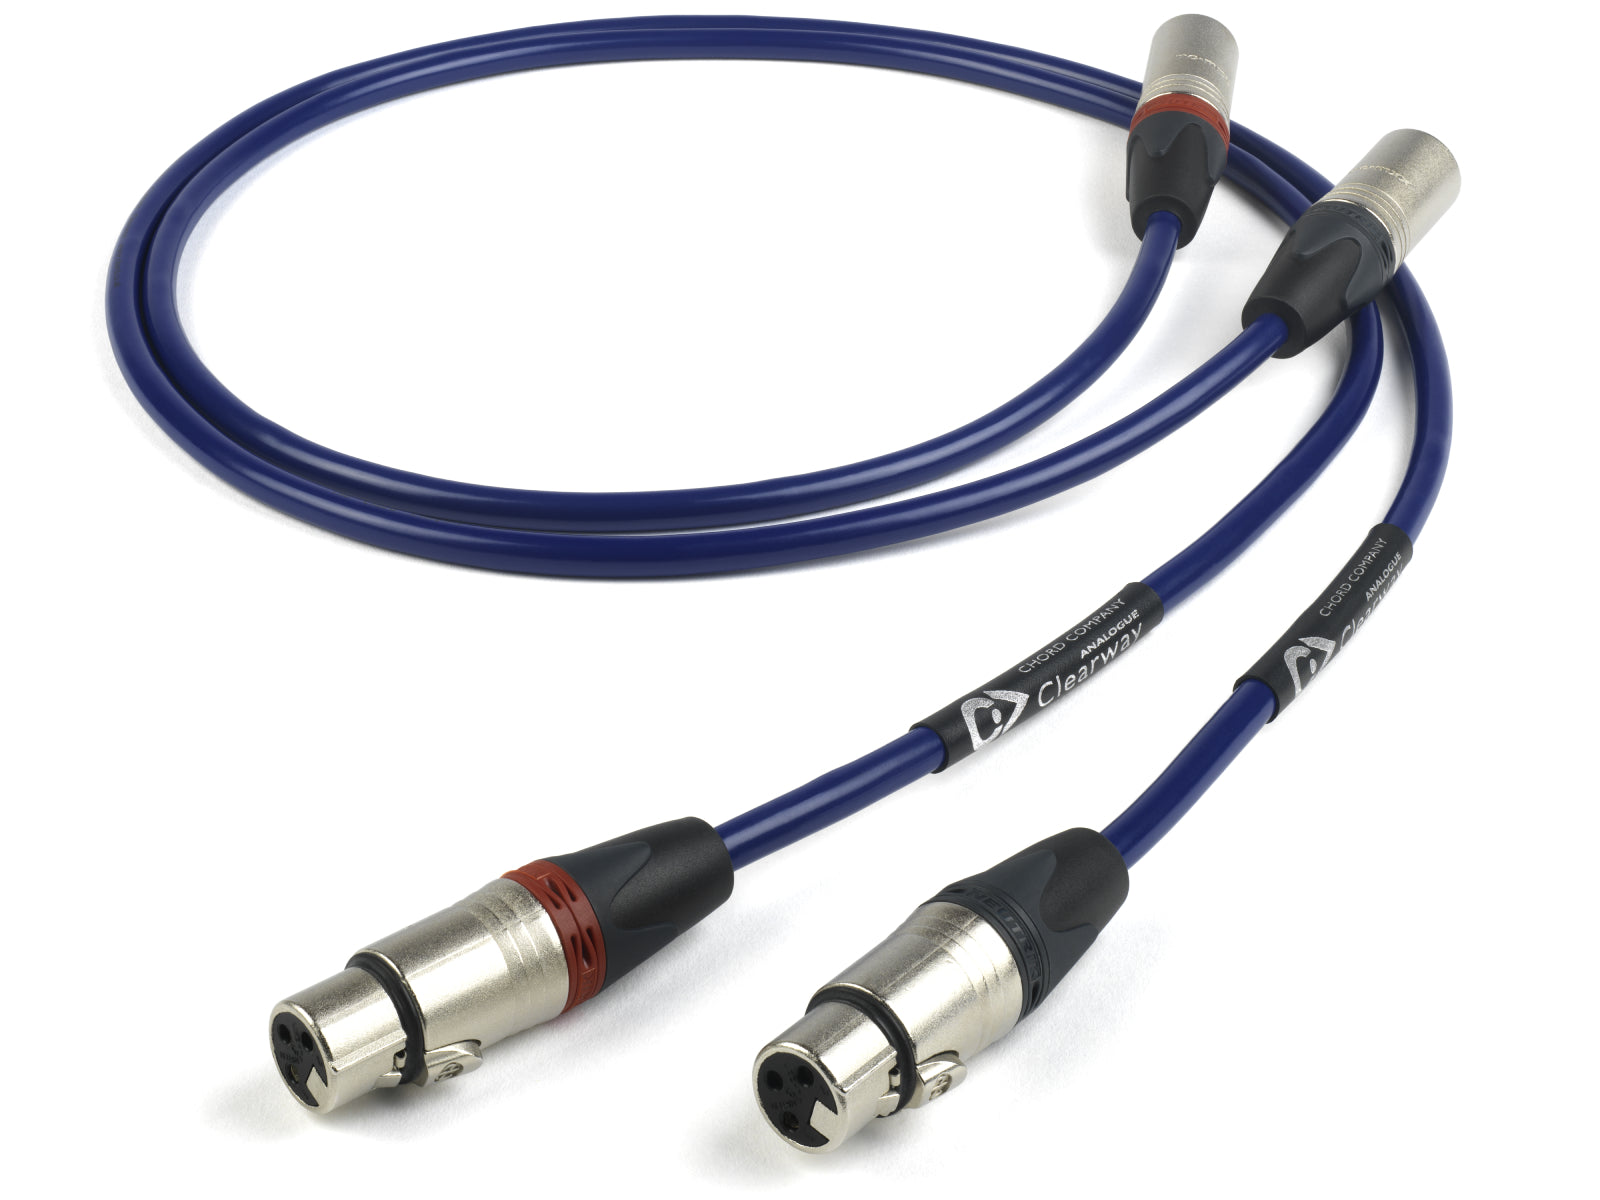 Chord Clearway Analogue XLR (ChorAlloy plated)